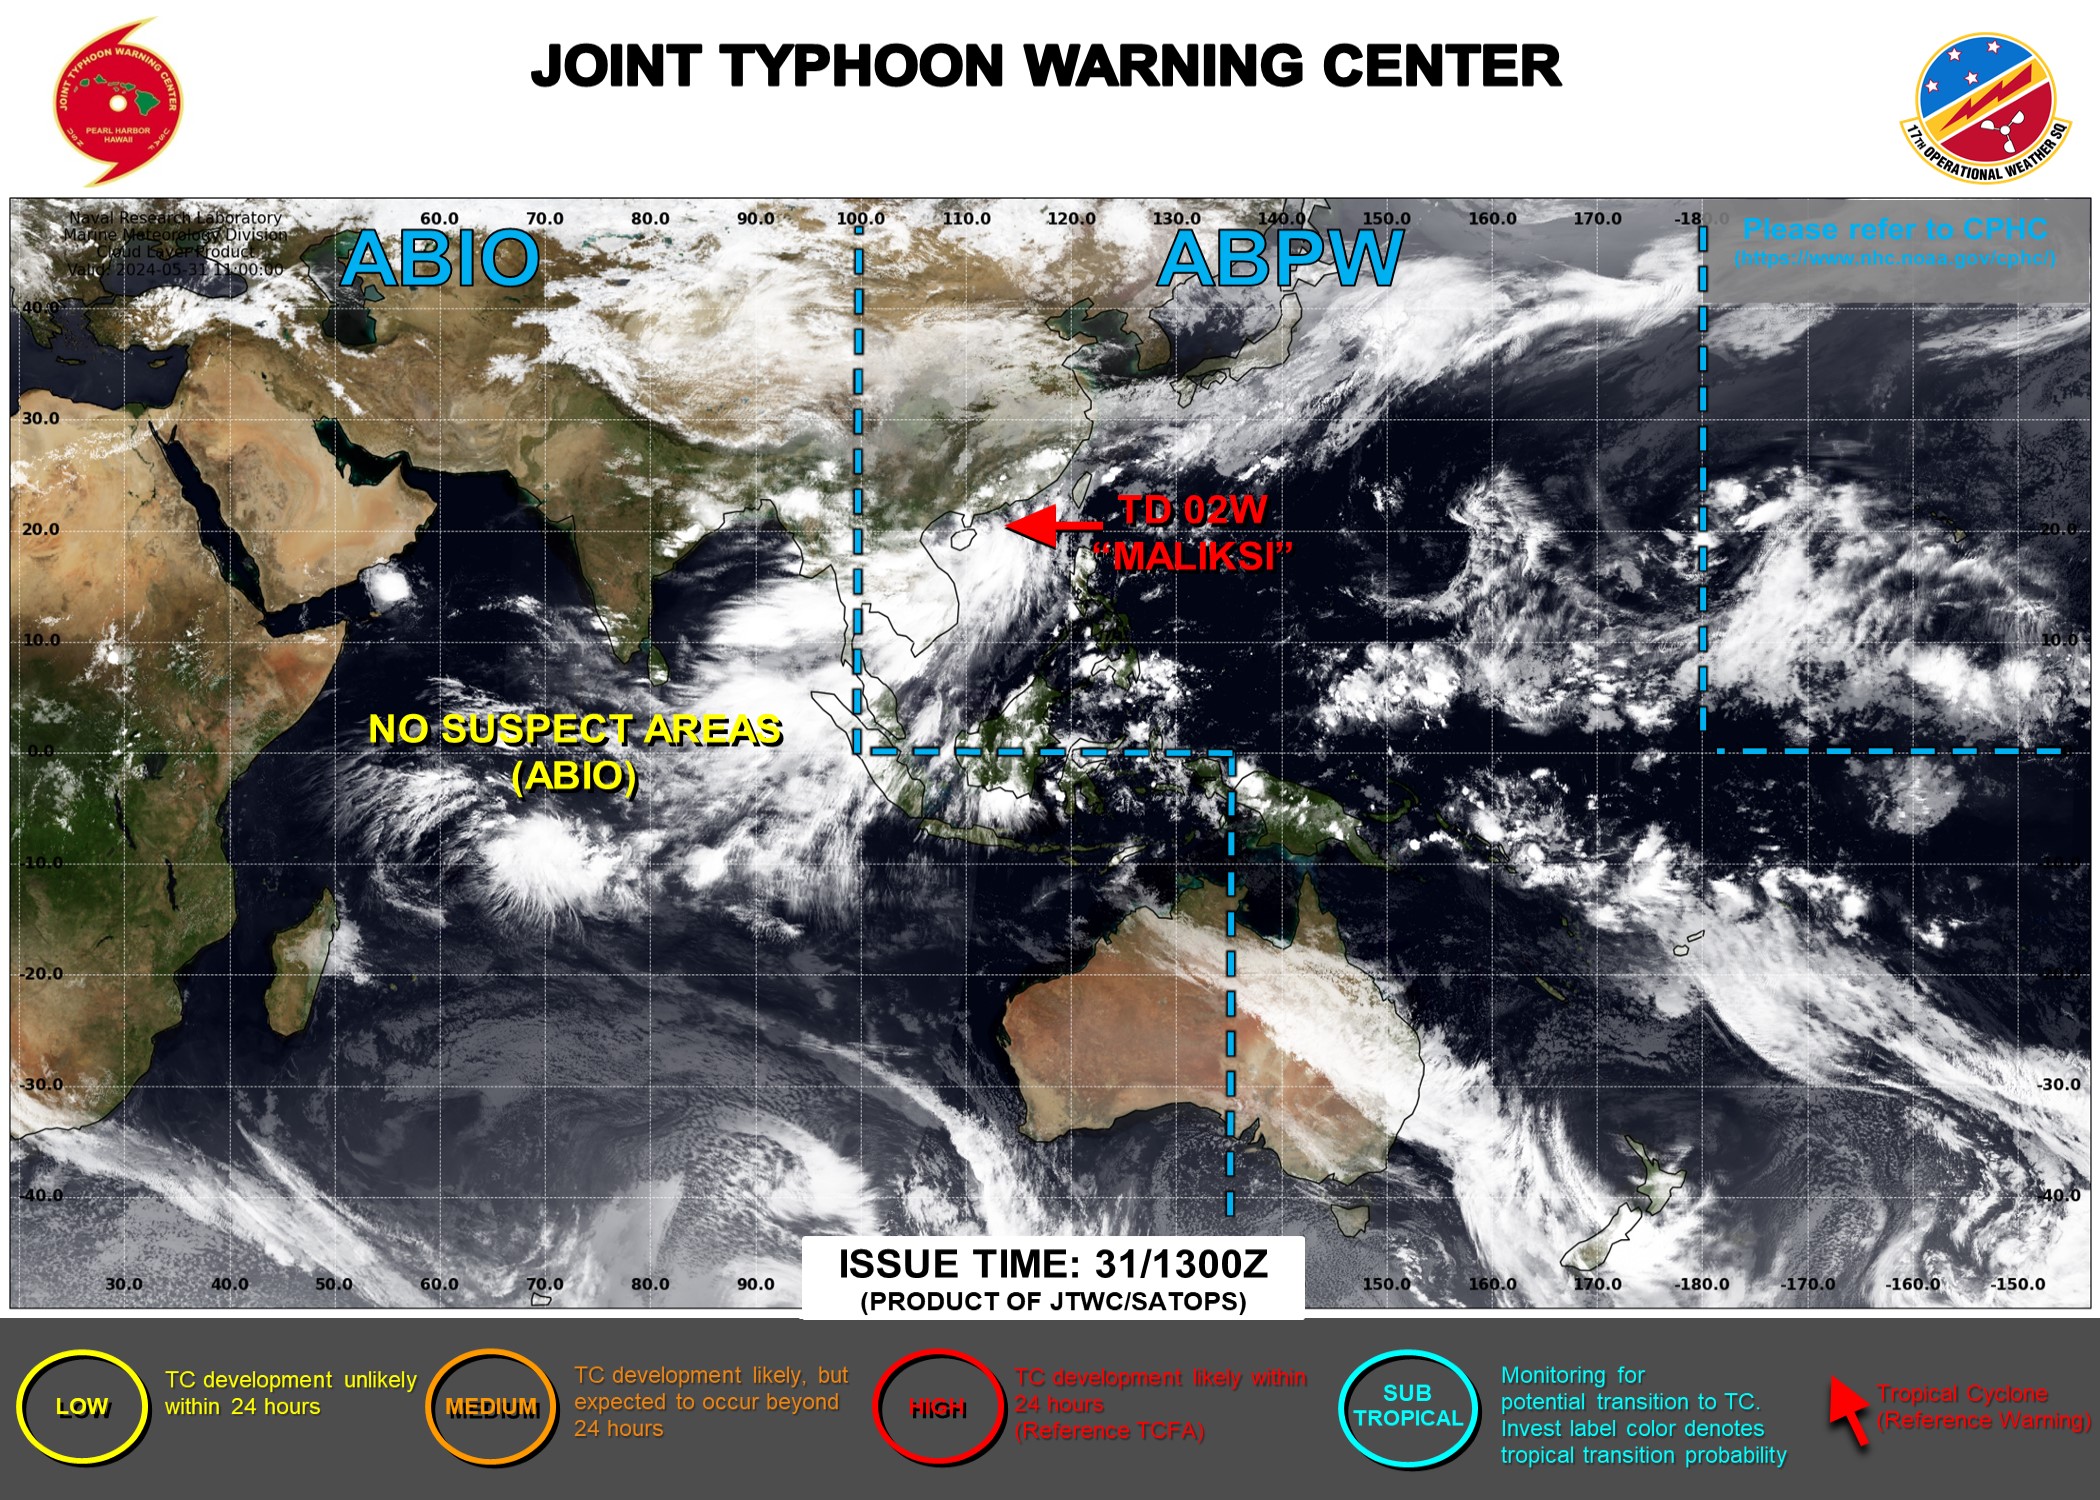 JTWC IS ISSUING 6HOURLY WARNINGS AND 3HOURLY SATELLITE BULLETINS ON 02W AND 3HOURLY SATELLITE BULLETINS ON INVEST 94S